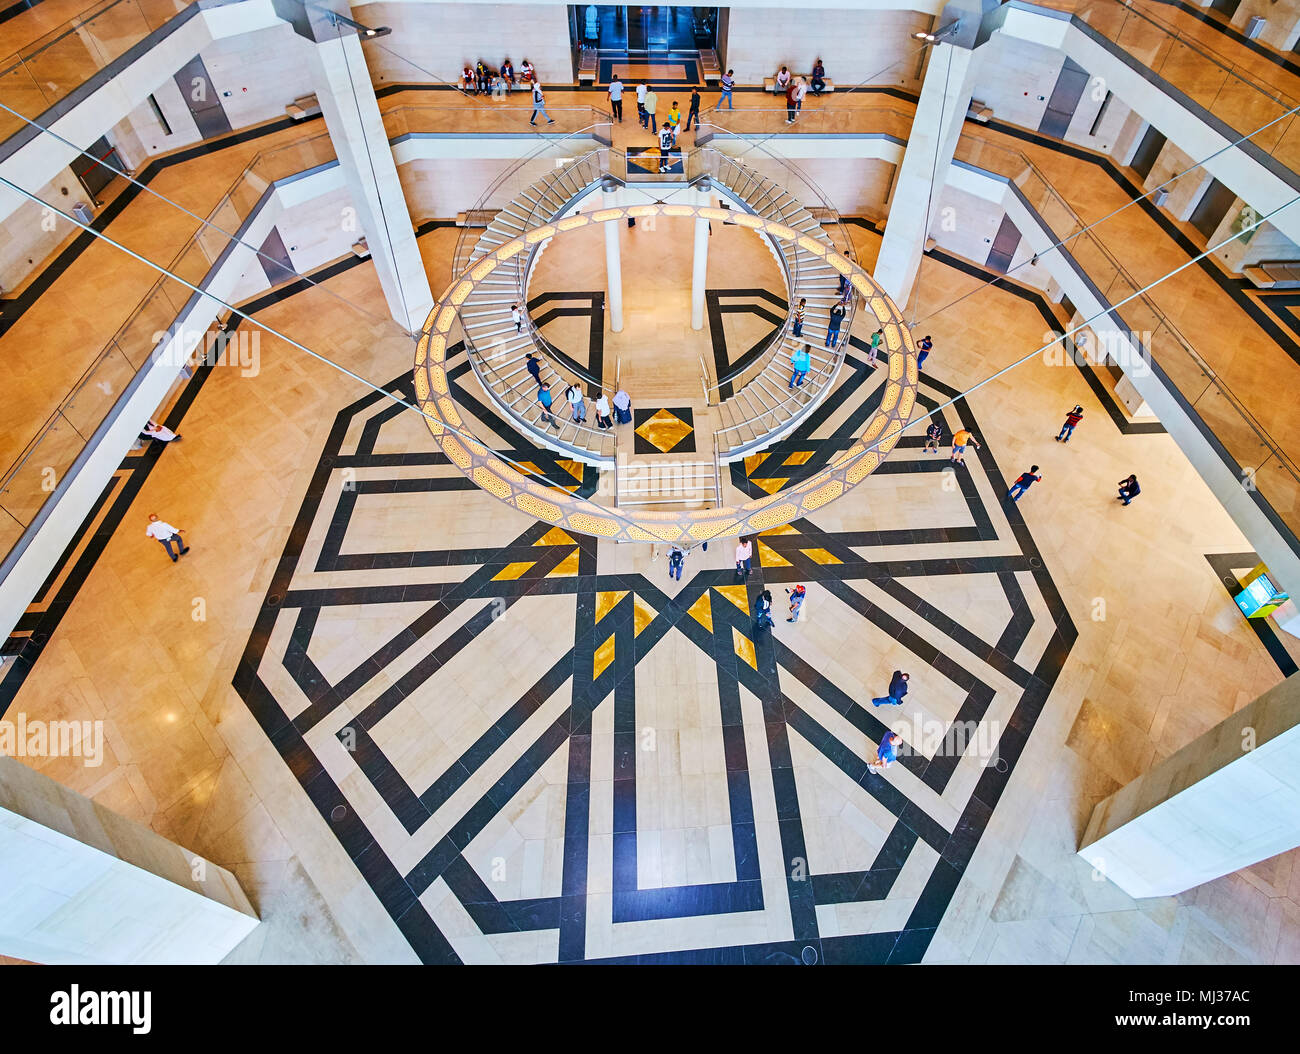 DOHA, QATAR - FEBRUARY 13, 2018:  The contrast of circular chandelier and half-round staircases with stellar tile pattern on the floor of Islamic Art  Stock Photo